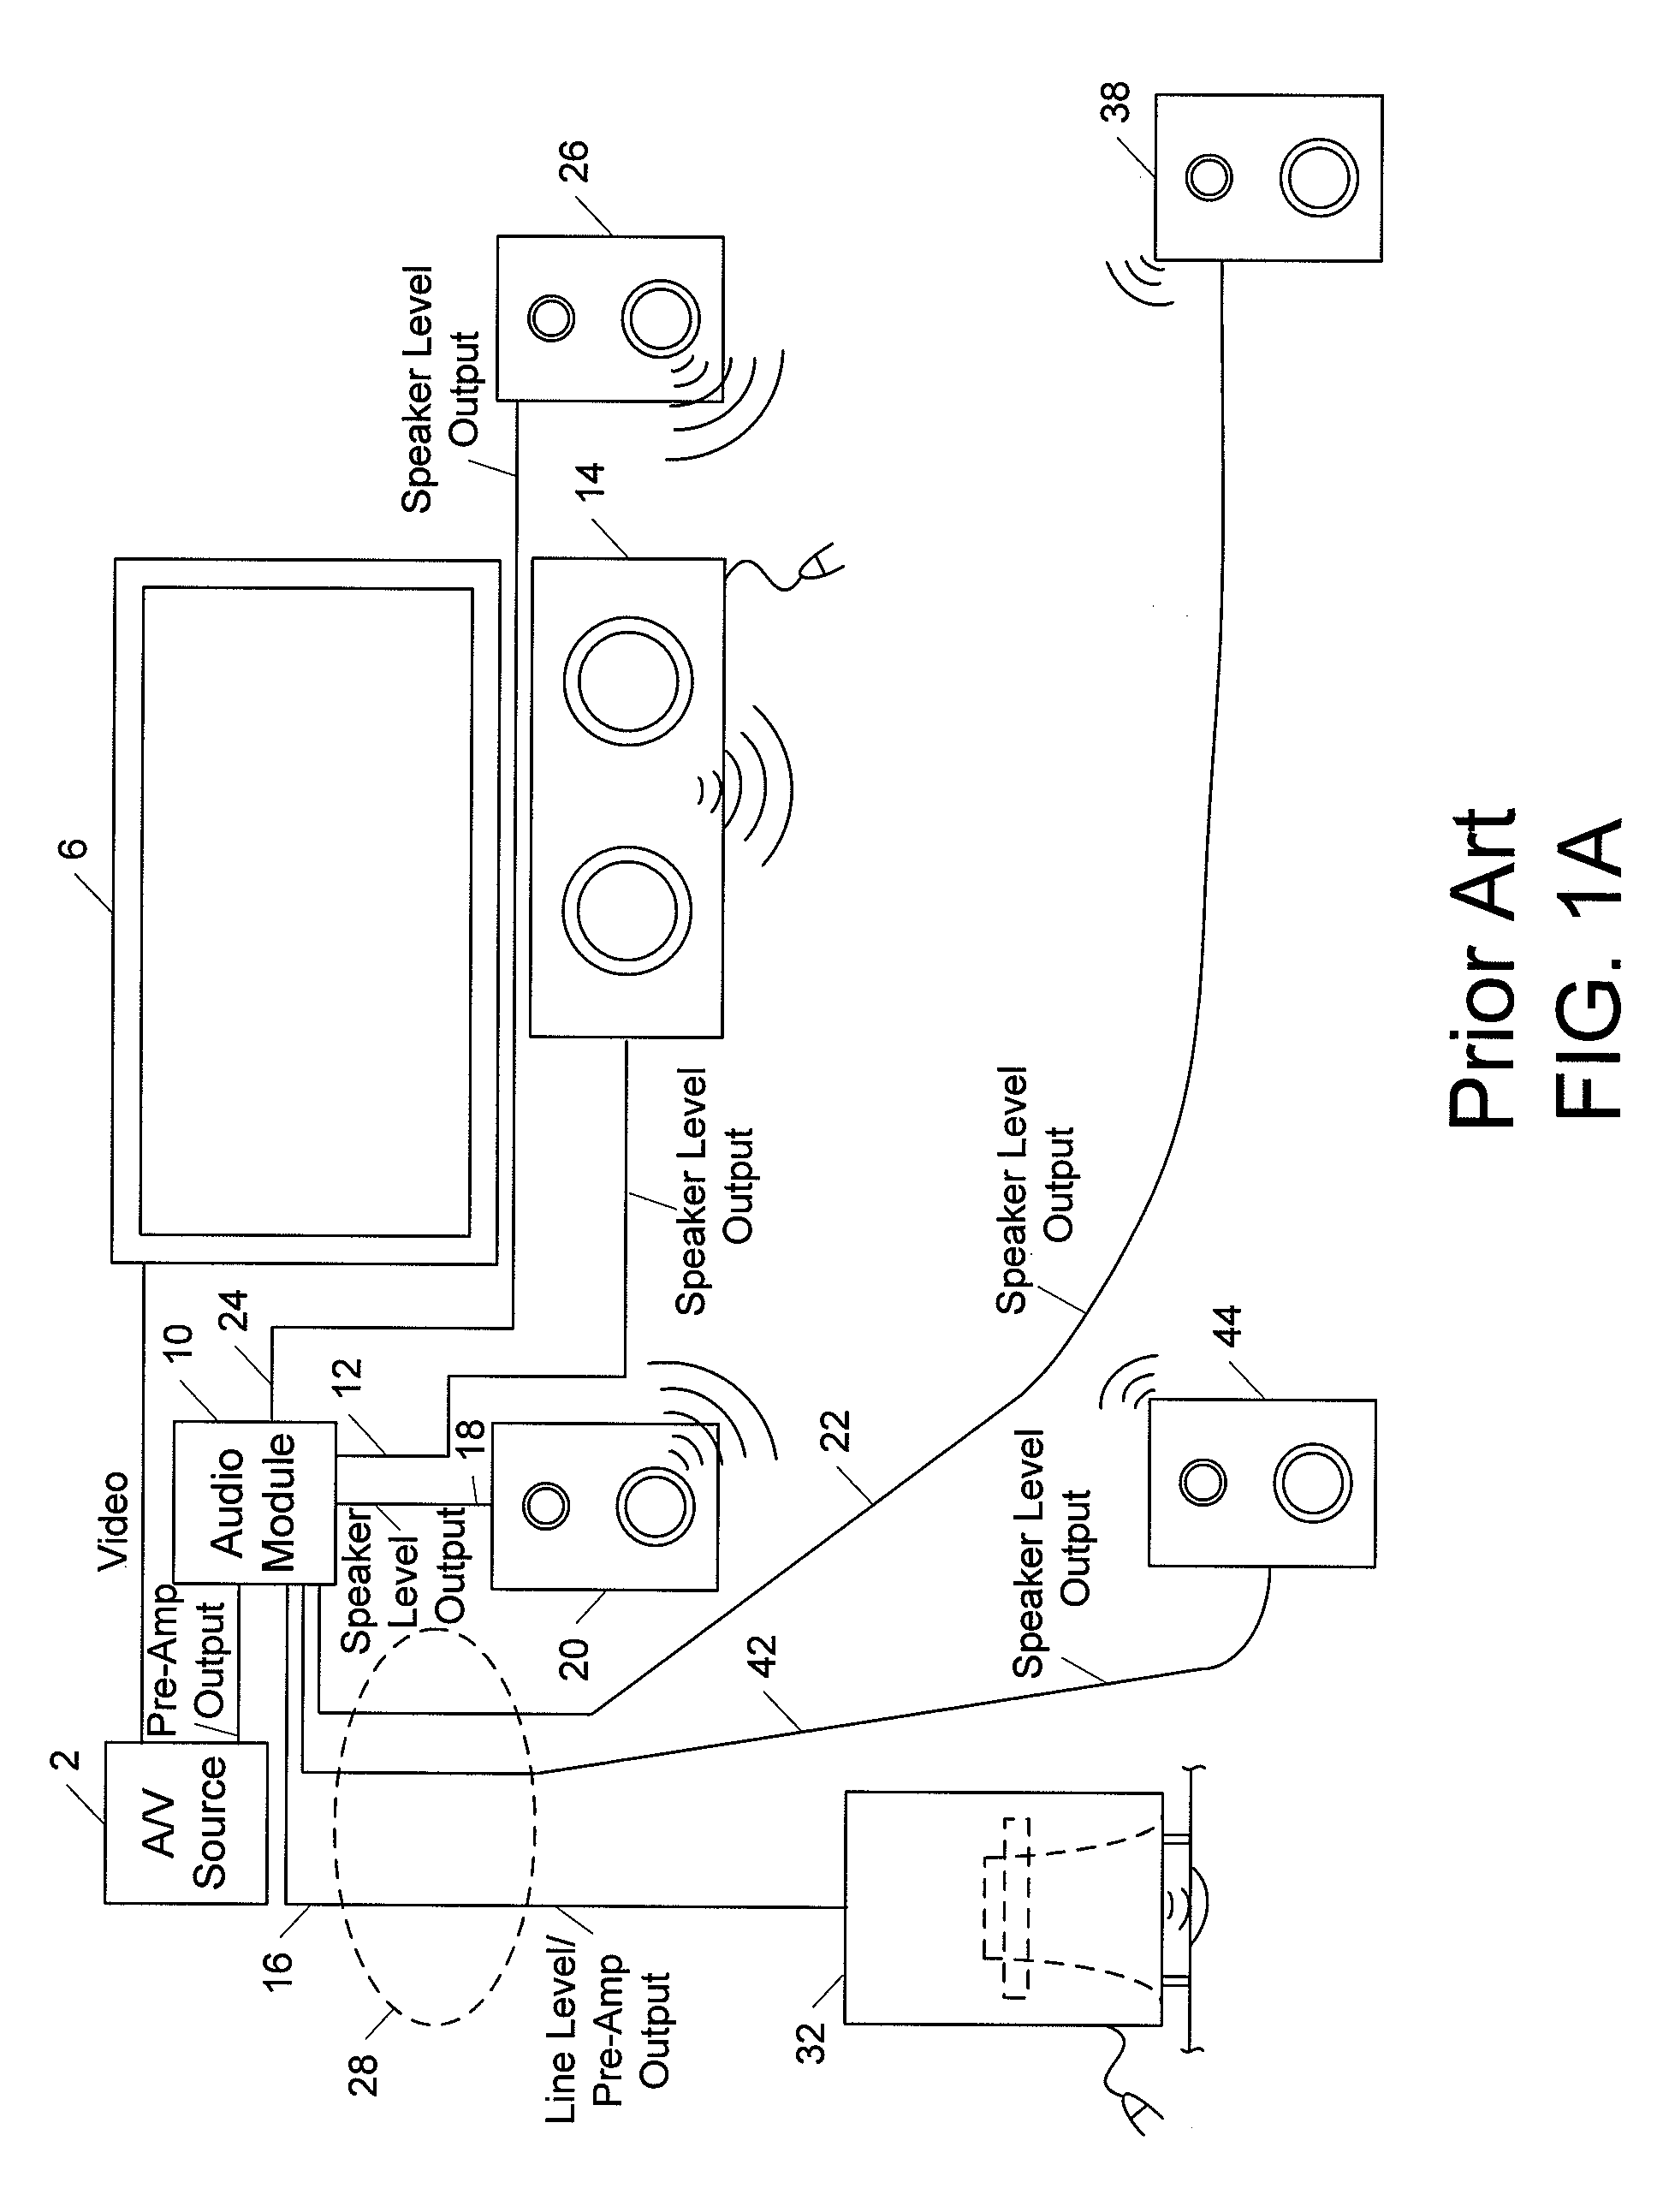 Wireless and wired speaker hub for a home theater system